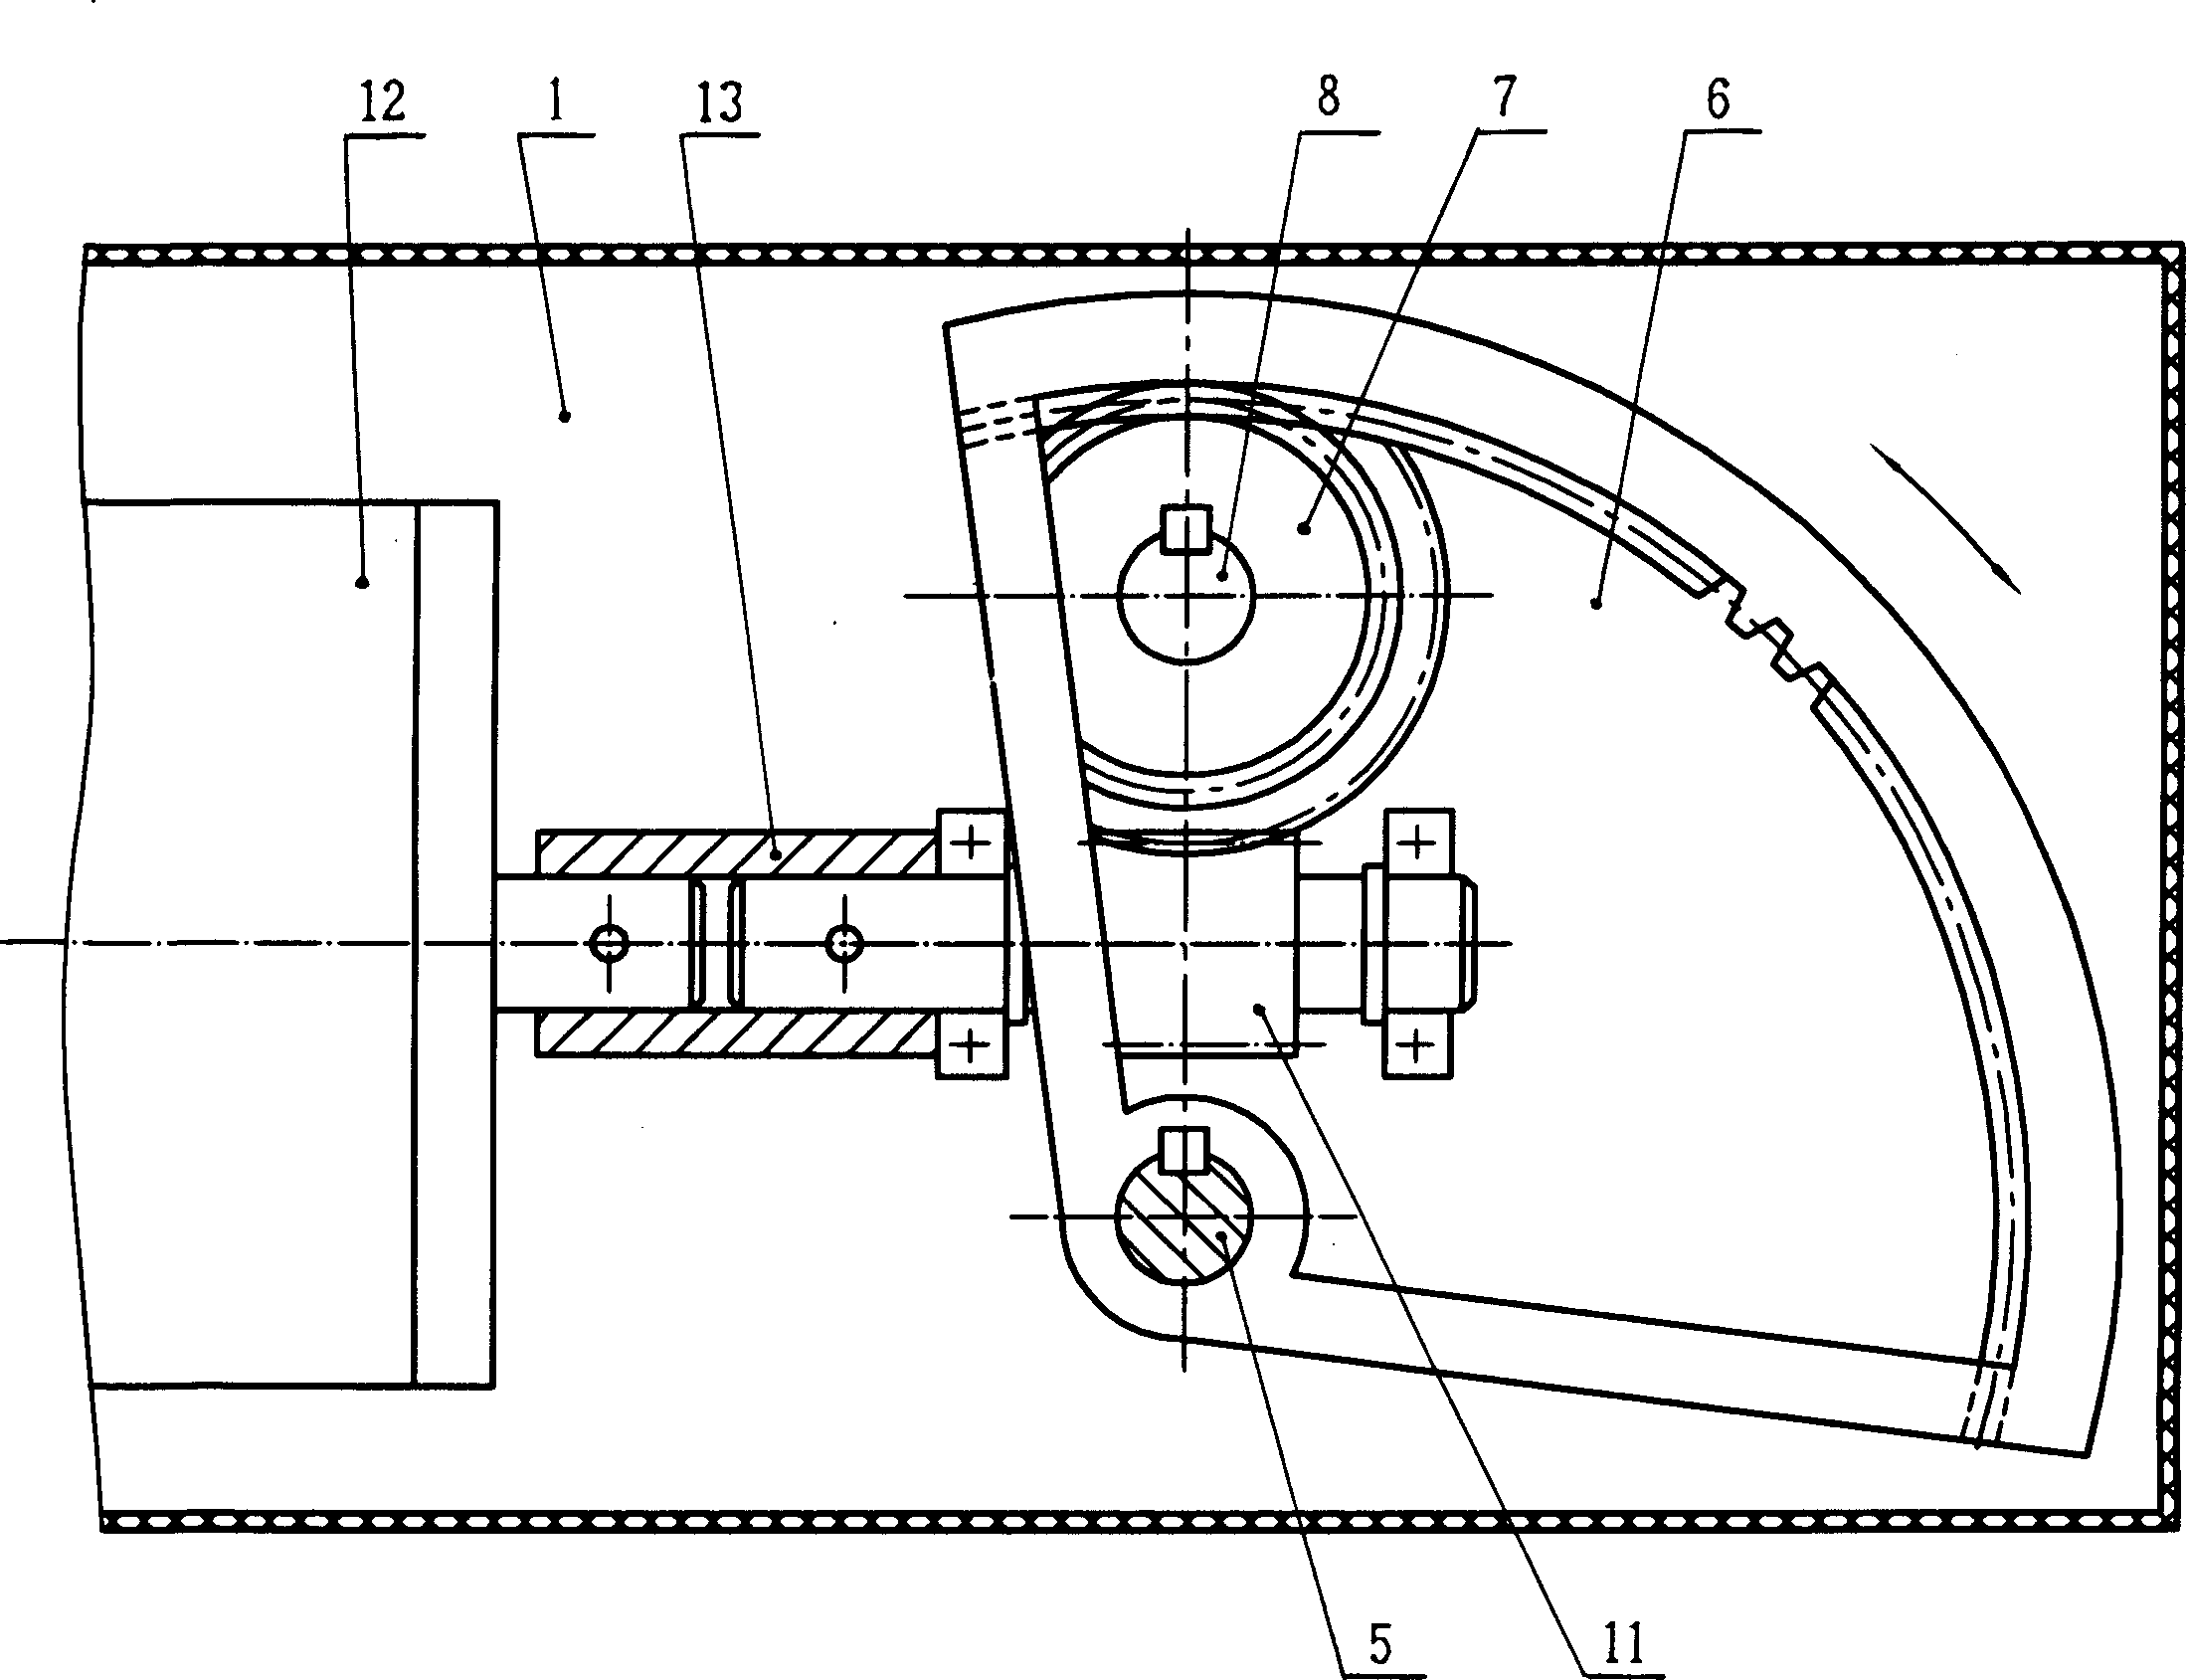 Roating shaft type electric device for opening windows